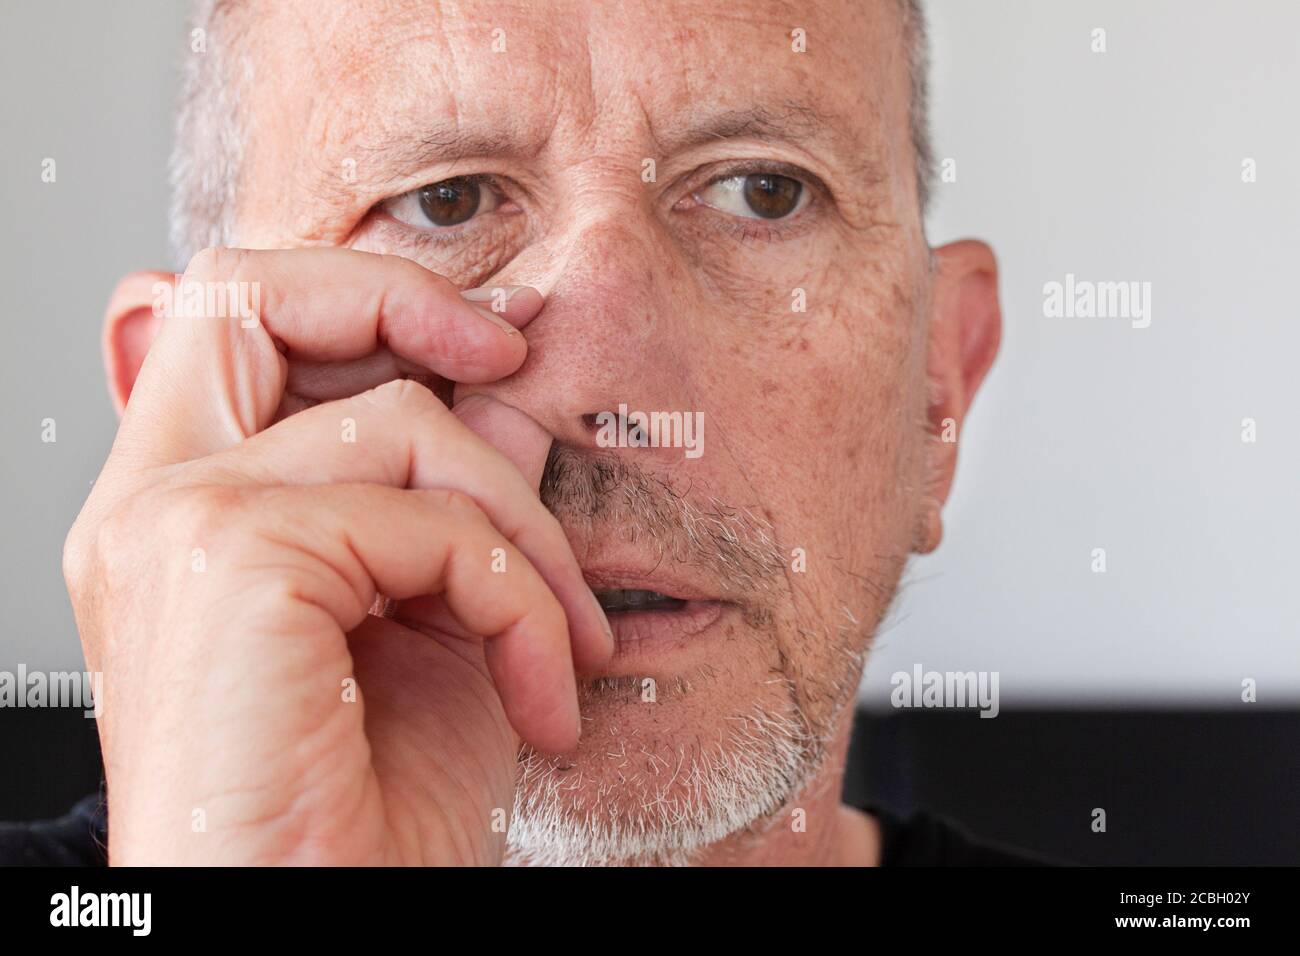 https://c8.alamy.com/comp/2CBH02Y/senior-man-with-unshaved-stubble-beard-picking-his-nose-thumb-up-in-his-nostril-close-up-image-2CBH02Y.jpg